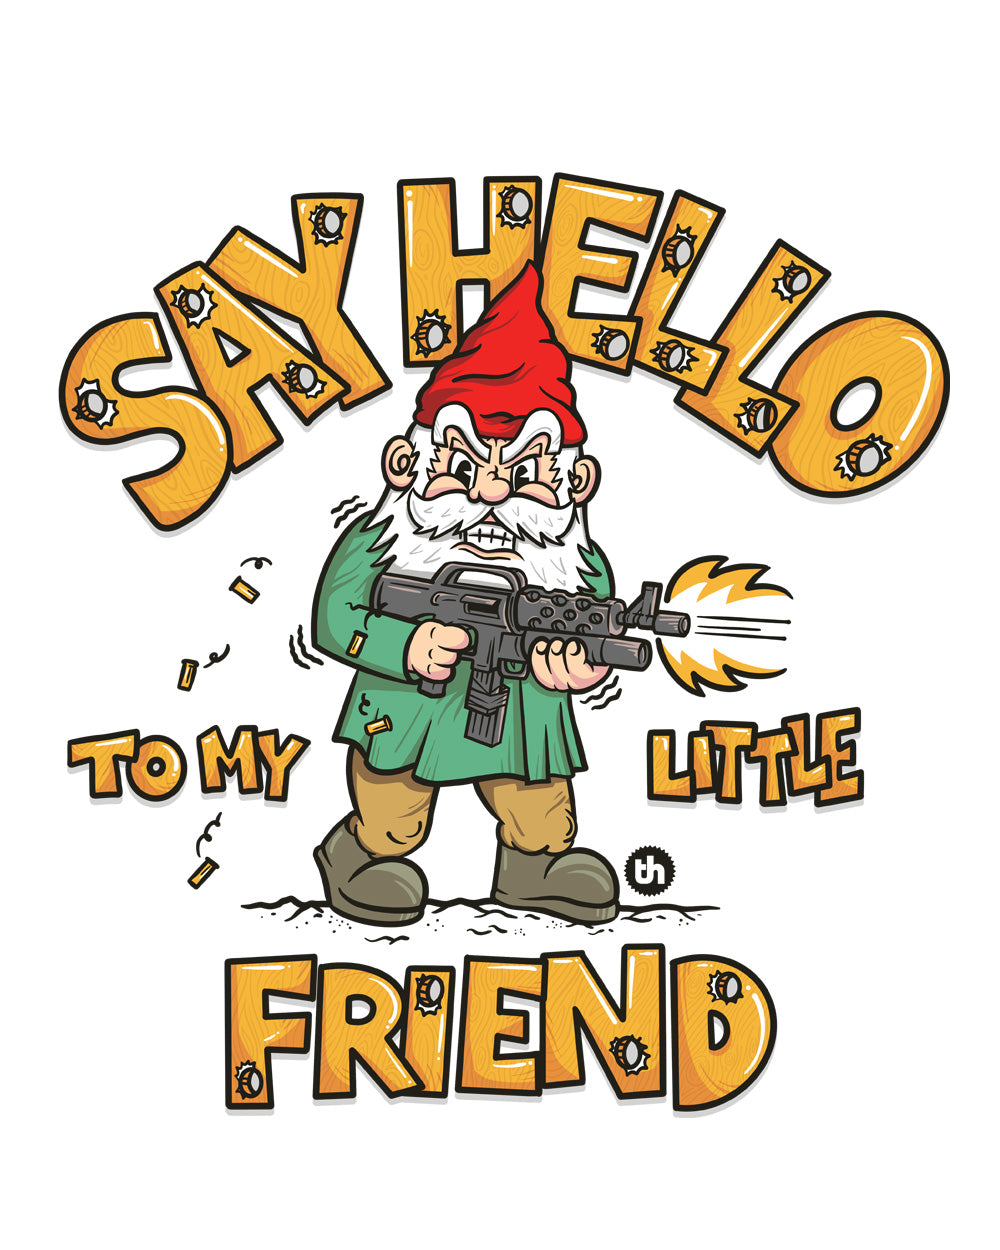 Say Hello to My Little Friend Funny Garden Gnome Character Anti-Social Cotton T-Shirt